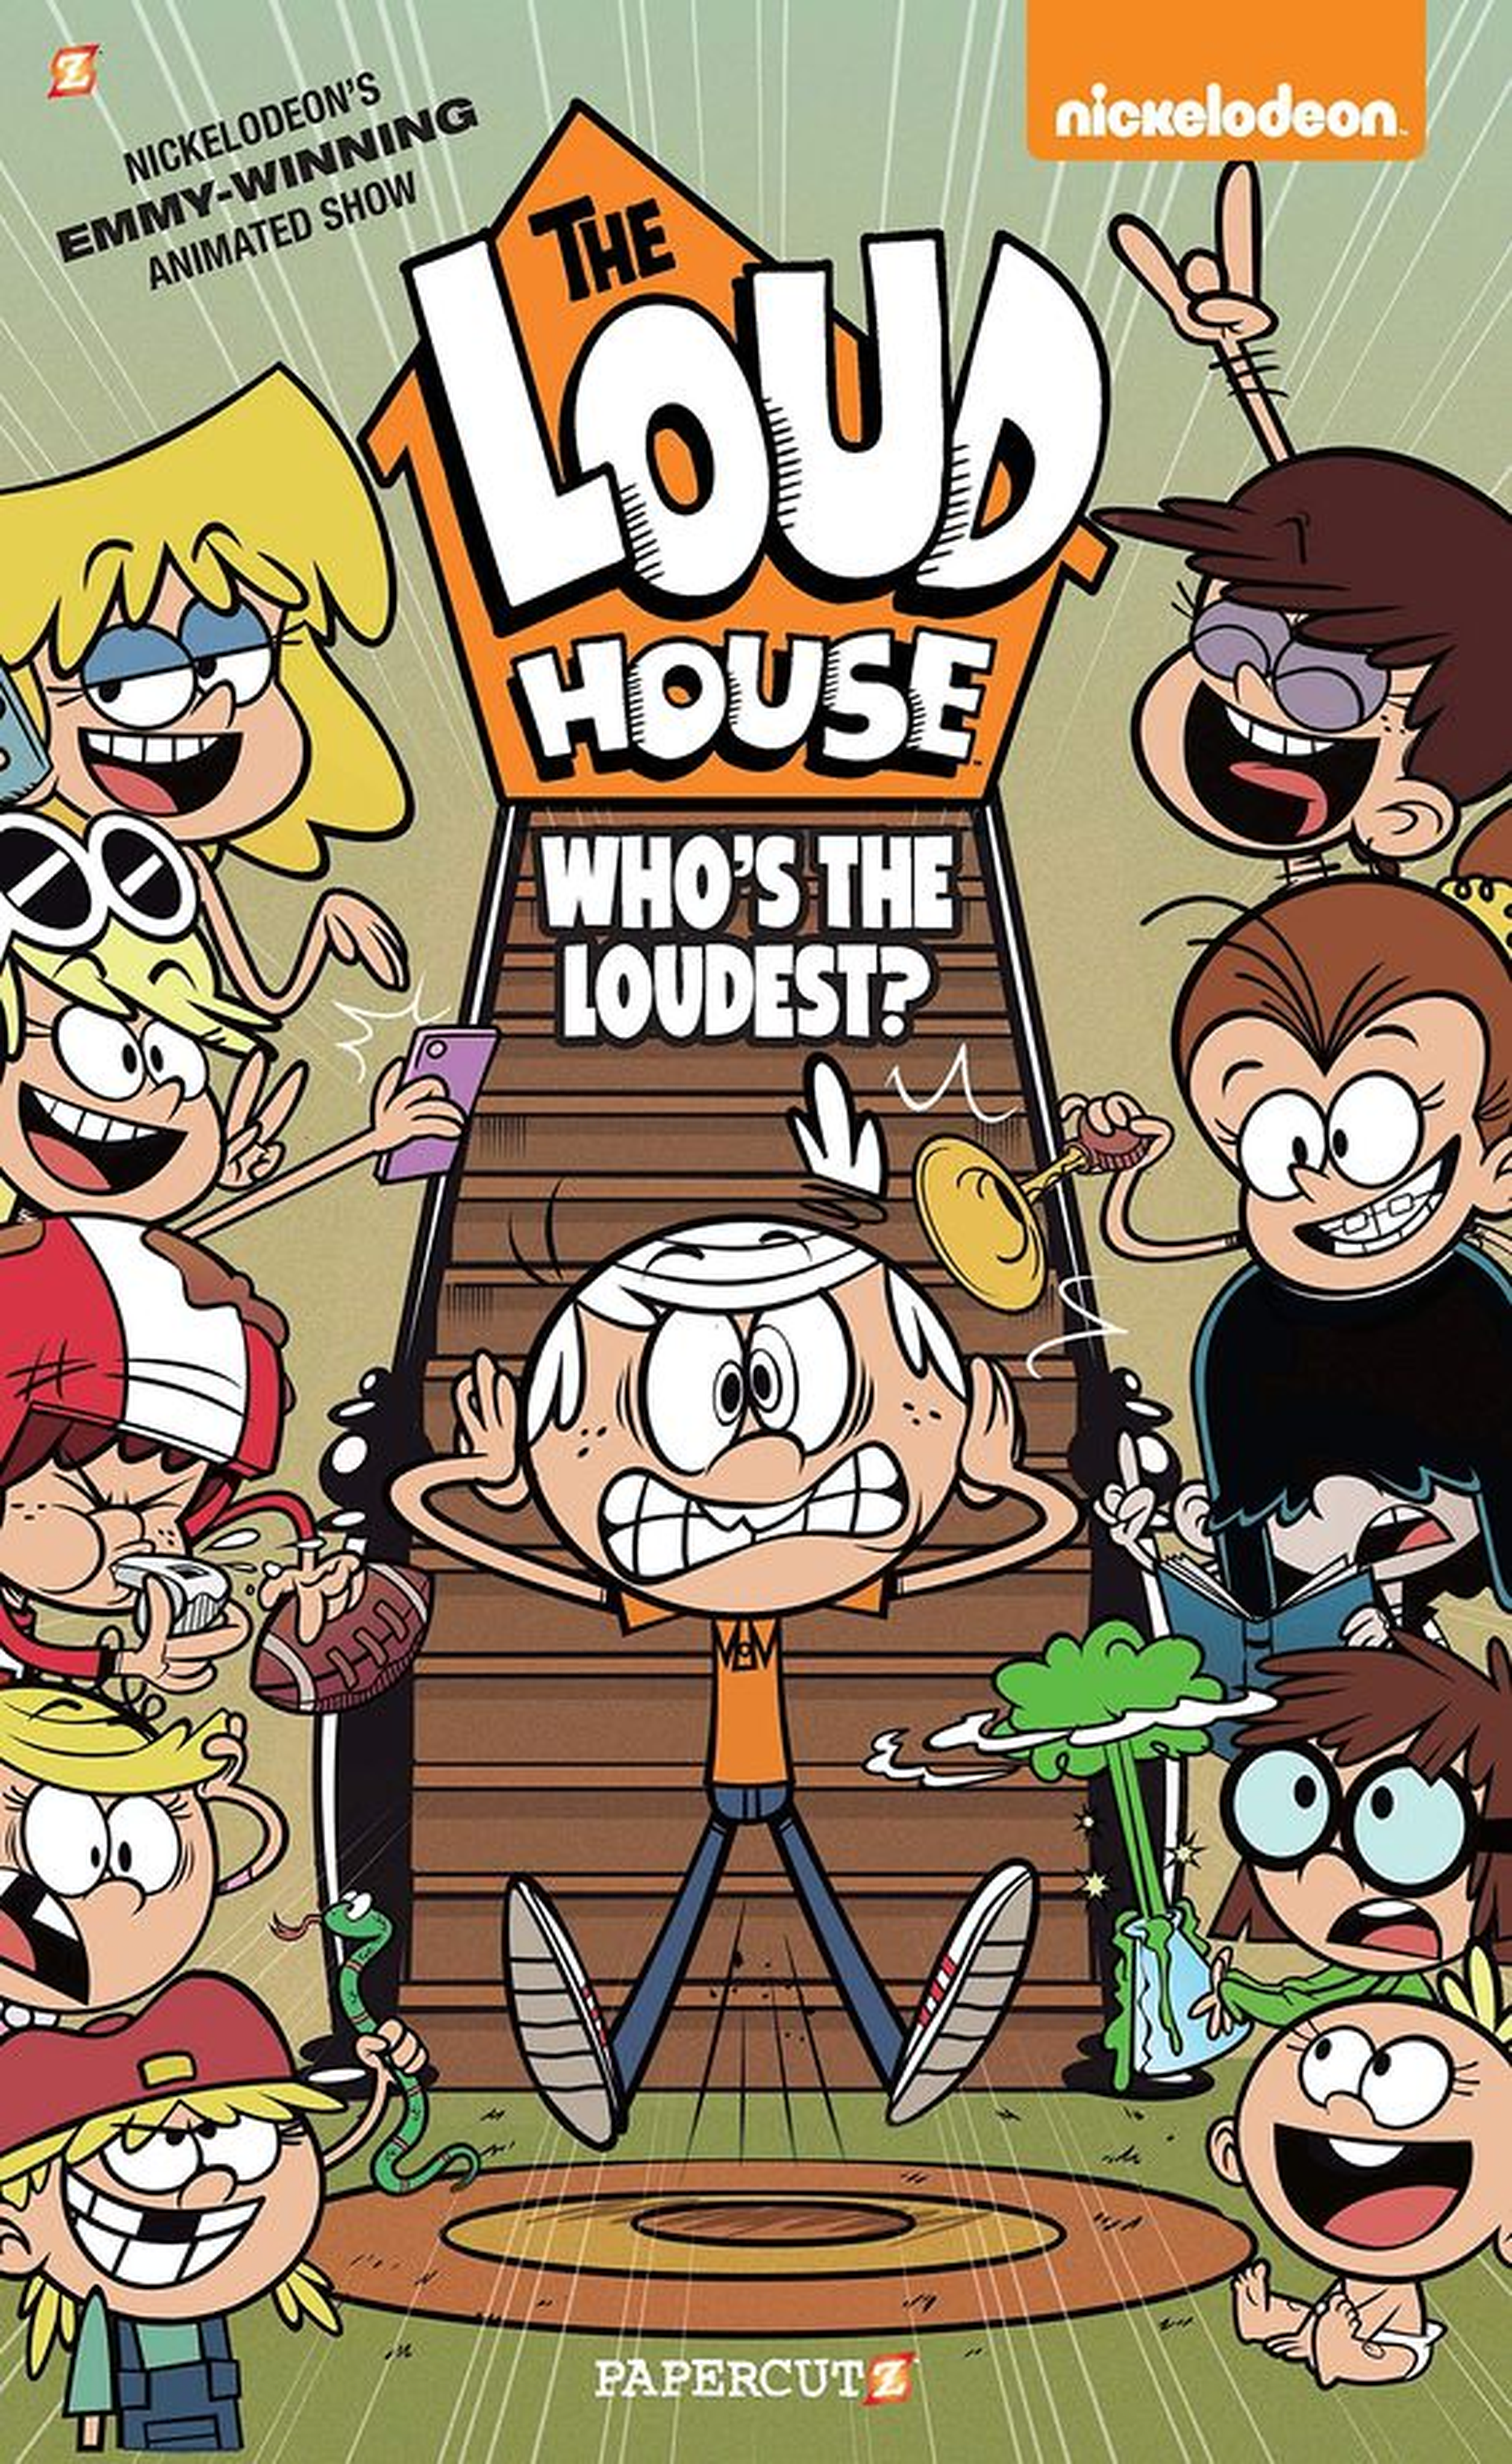 4 Some Porn Loud House - The Loud House by Chris Savino Was Banned in Kenya For Depicting Gay  Marriage | by Winifred J. Akpobi | An Injustice!